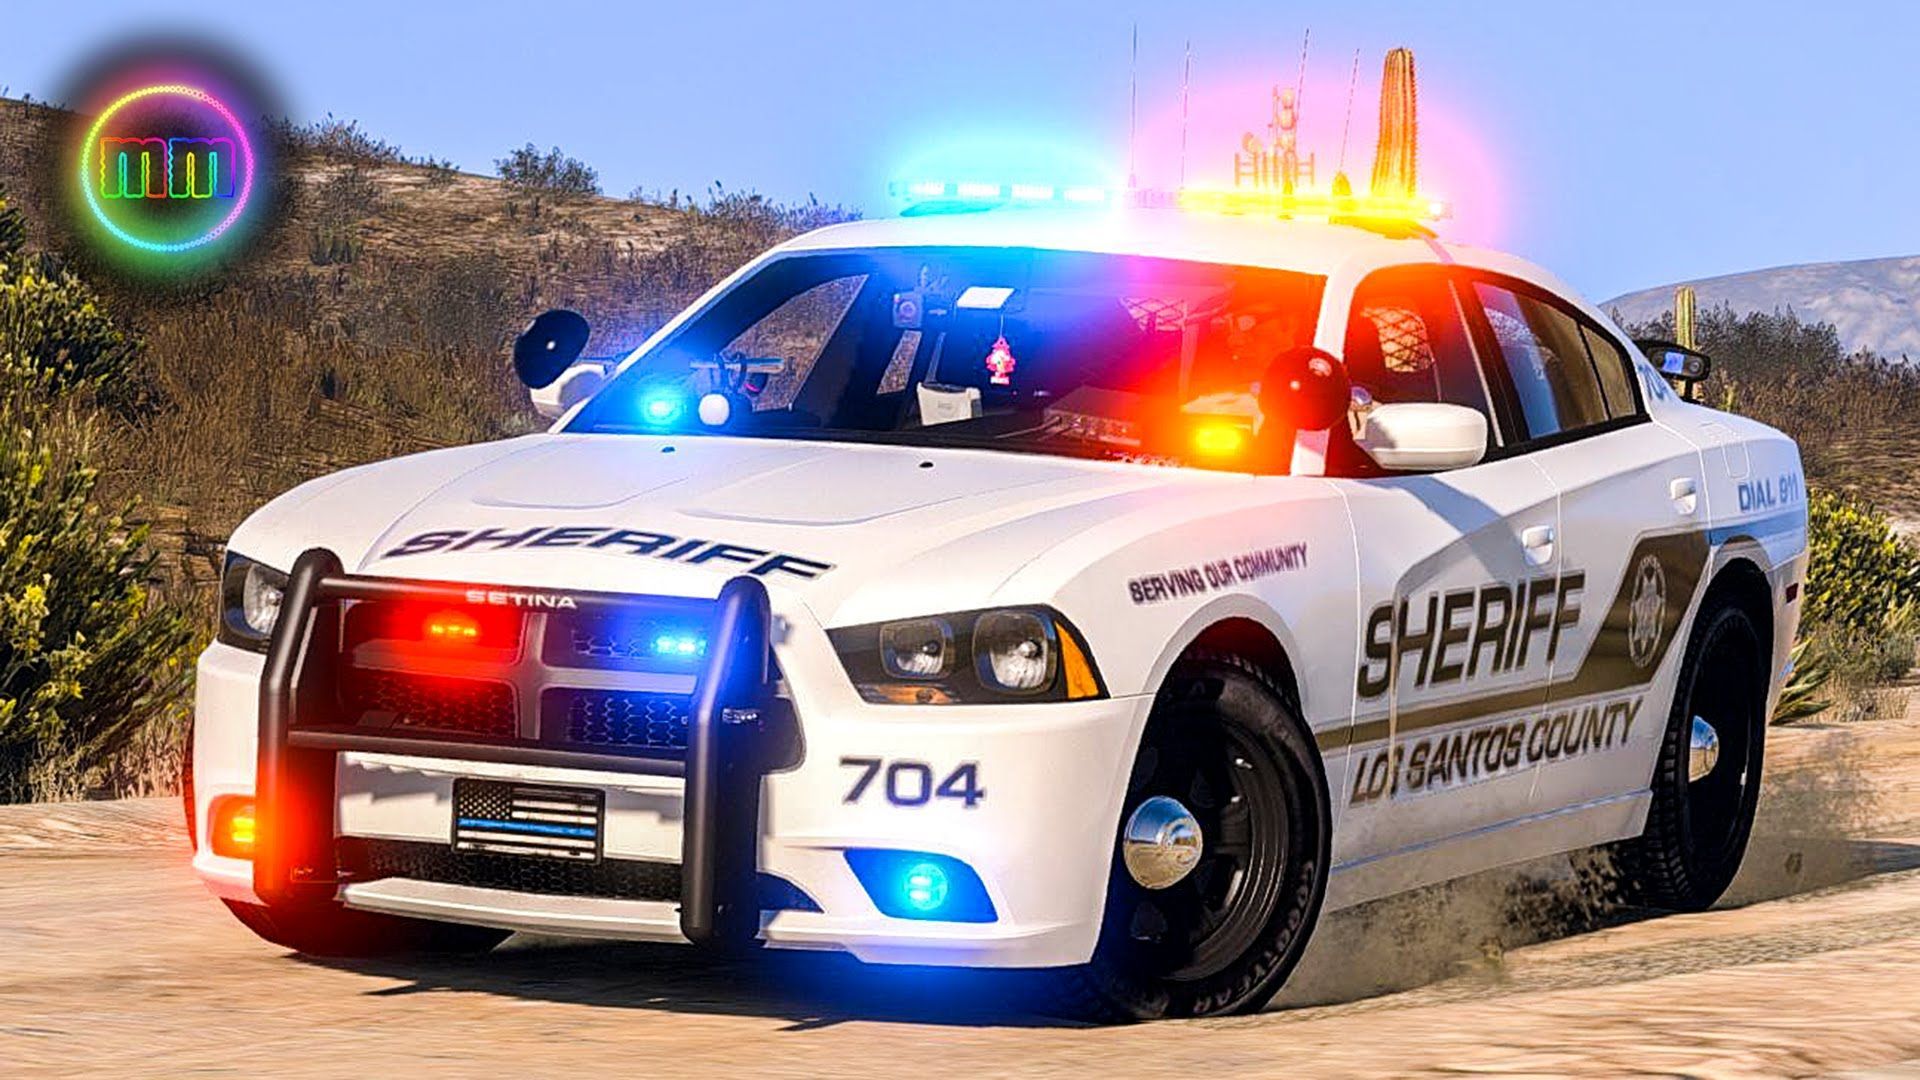 GTA 5 Sheriff Patrol Tow Truck Driver. Tow truck driver, Police cars, Truck driver